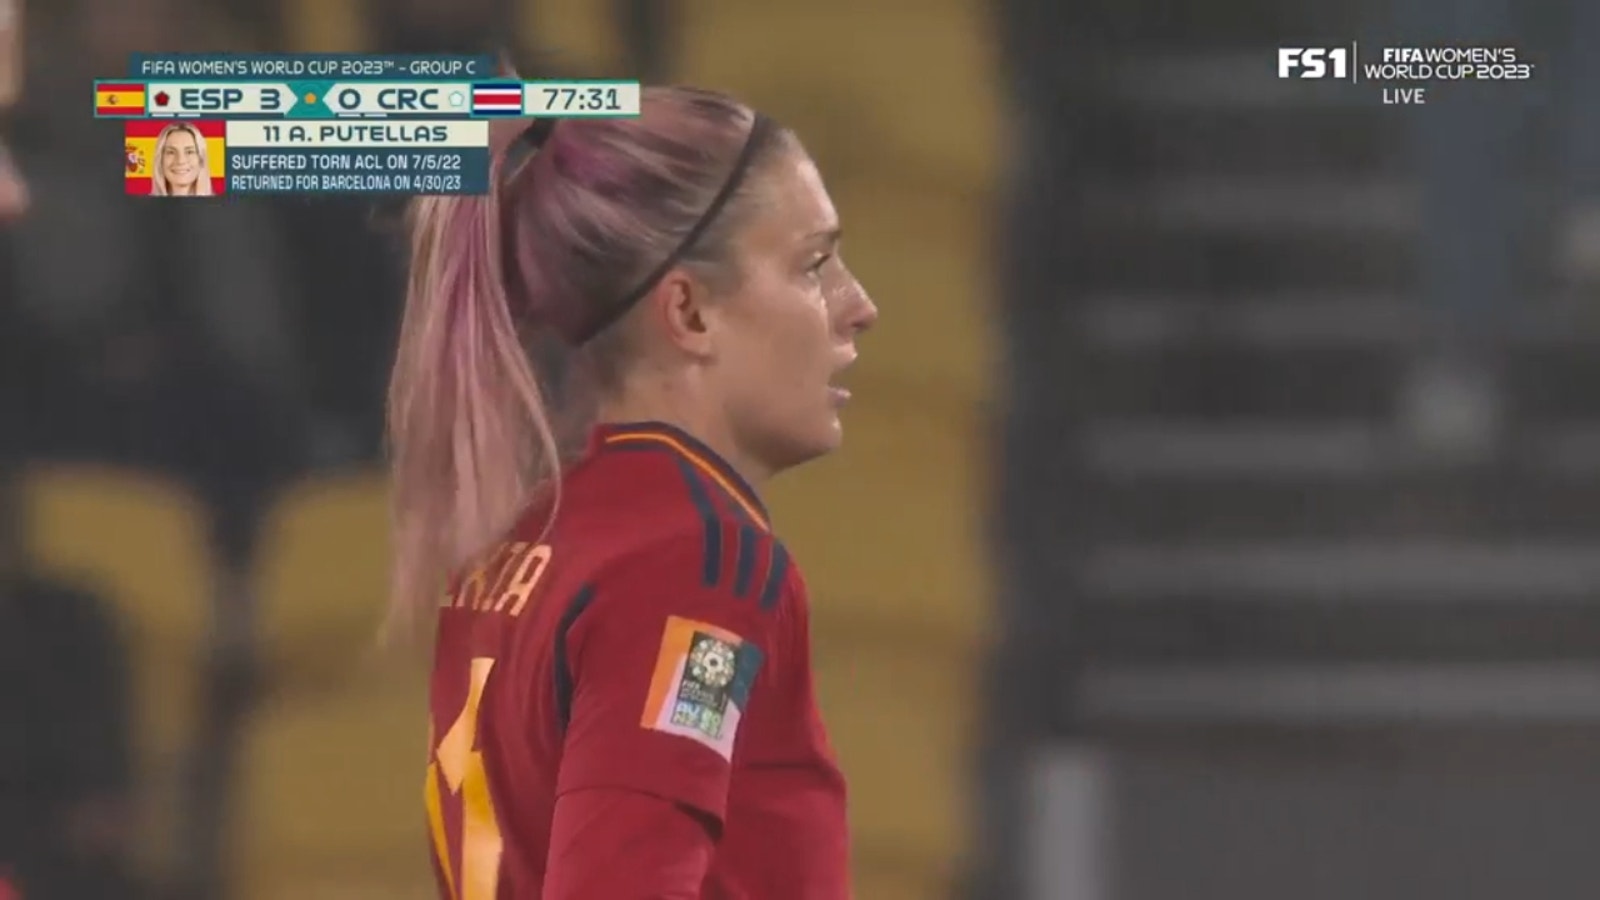 Spain's Alexia Putellas comes on as substitute in 77th minute of 3-0 win vs. Costa Rica